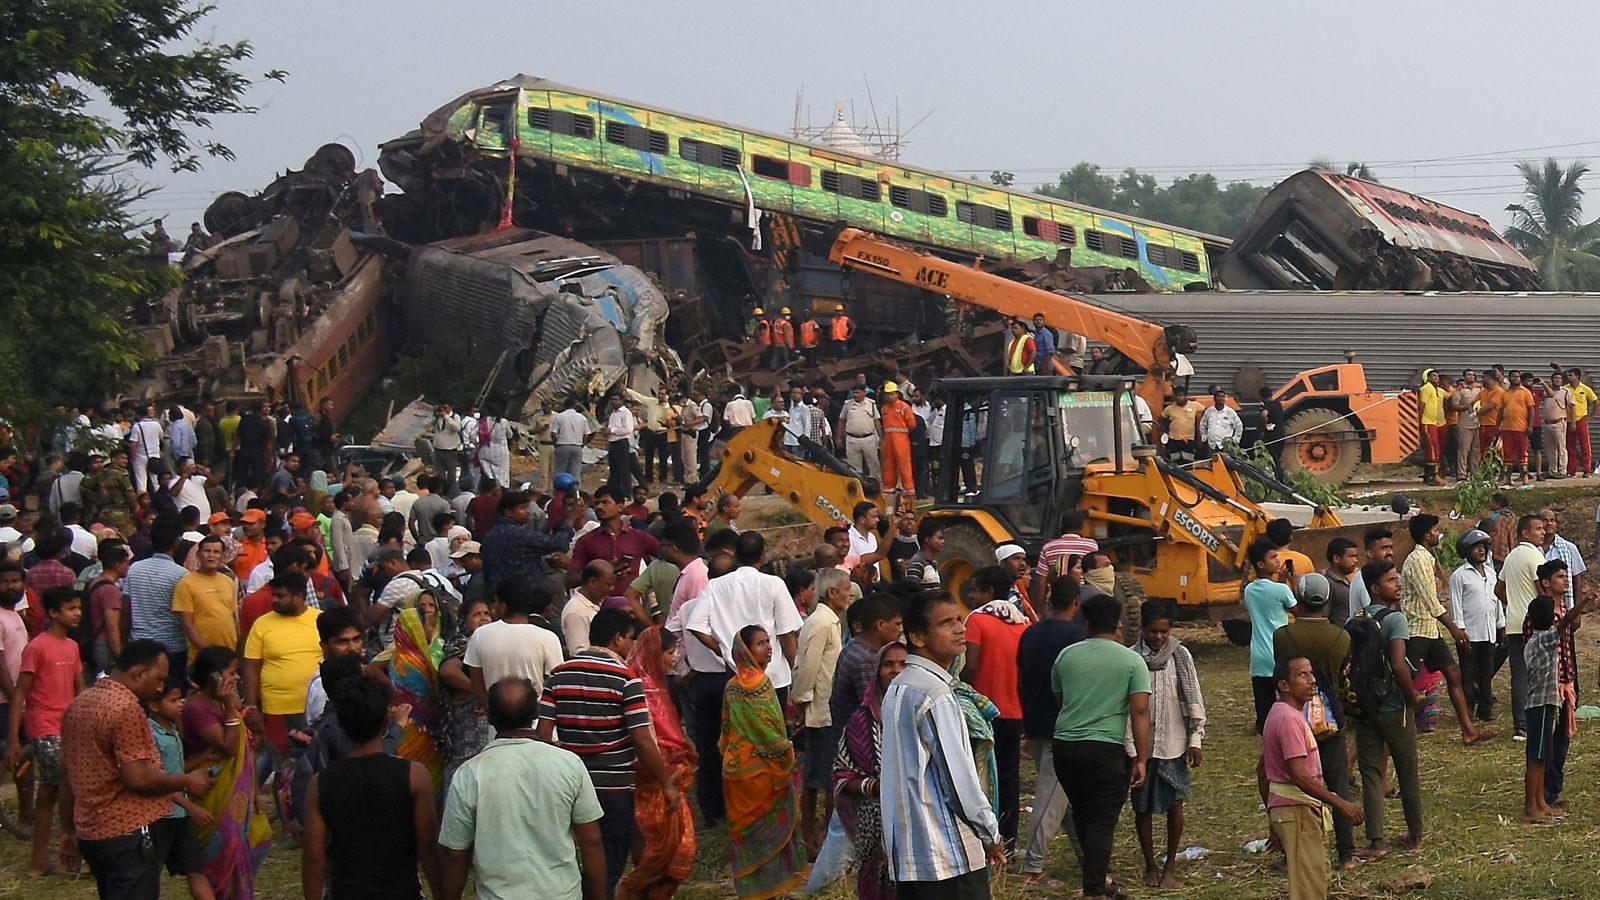 Signal failure likely caused train to change tracks before India crash, says minister